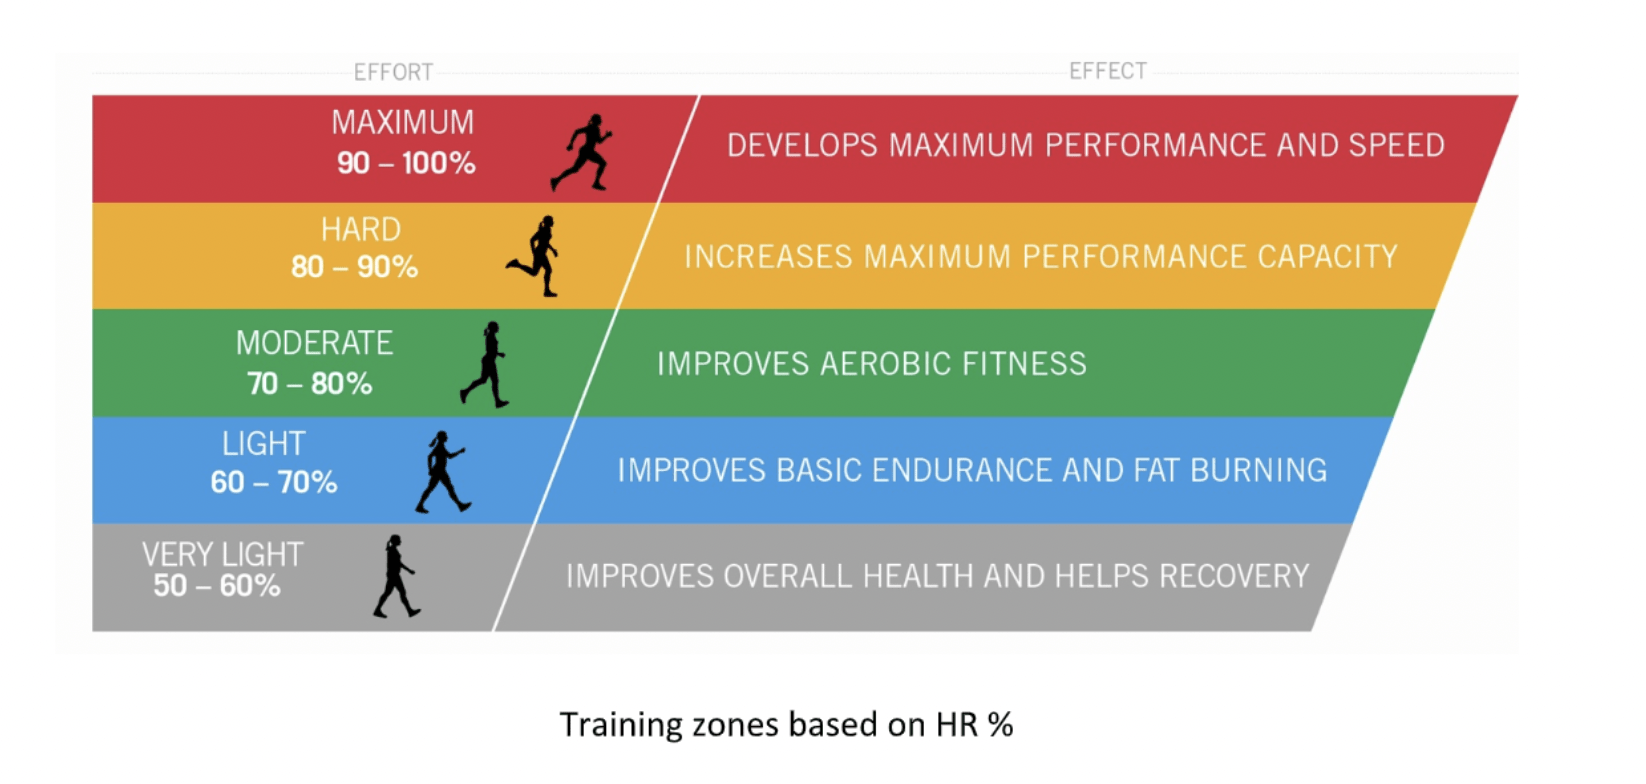 How I Use Training Zones for Performance and Longevity